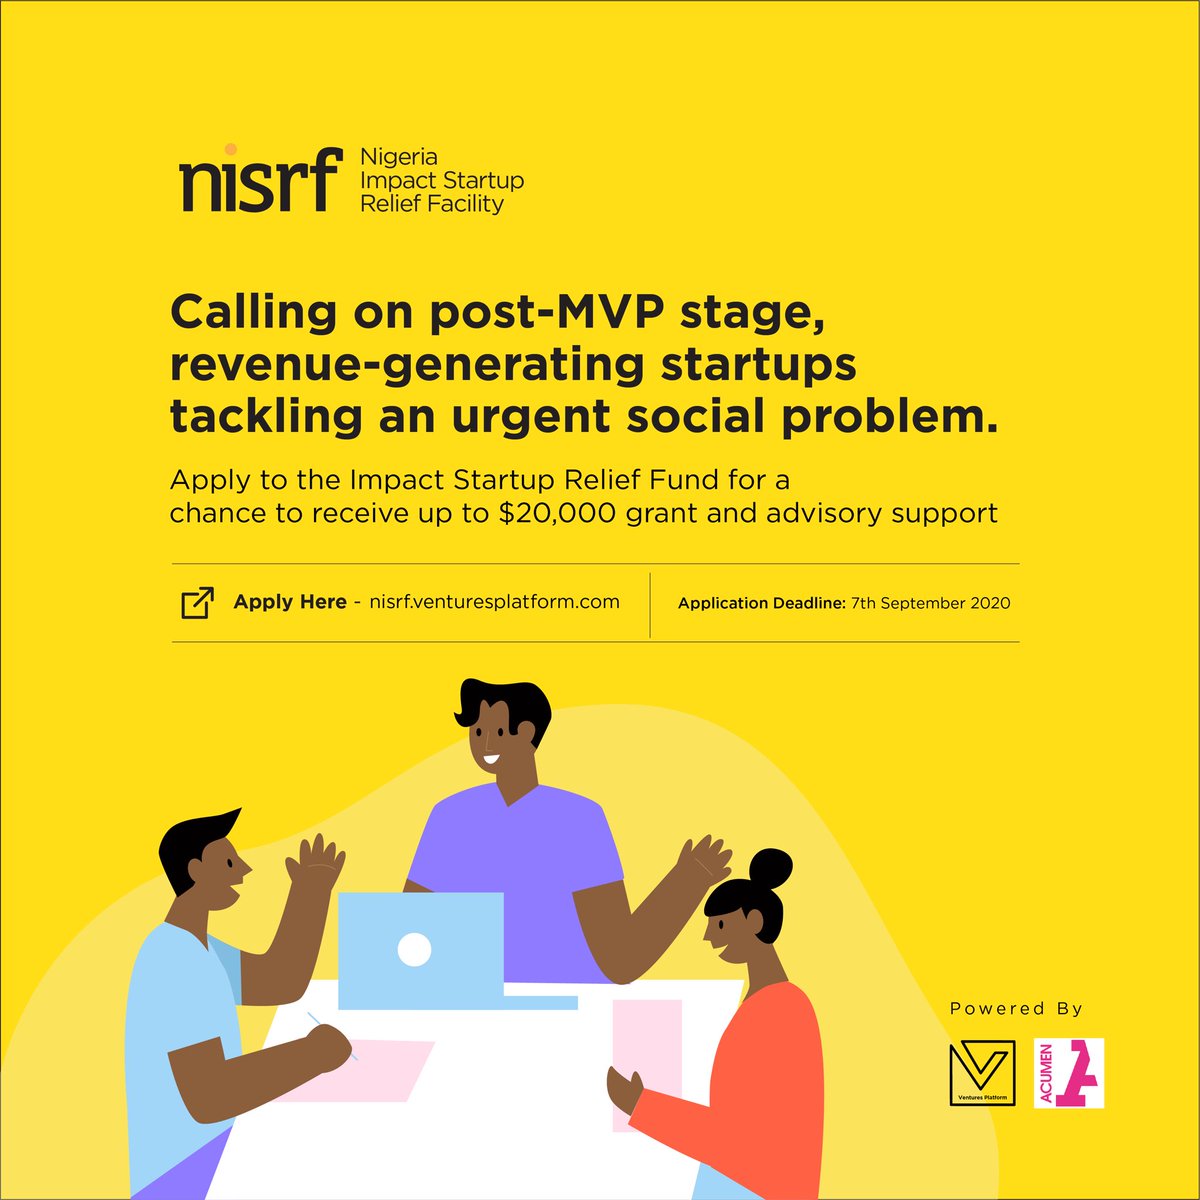 This is why  @vplatformhub &  @Acumen, with support from  @_loftyinc_, are launching the Nigeria Impact Startup Relief Facility (NISRF) to disburse grants to qualifying post-MVP stage, high-growth startups so they remain resilient through the  #COVID19 crisis.